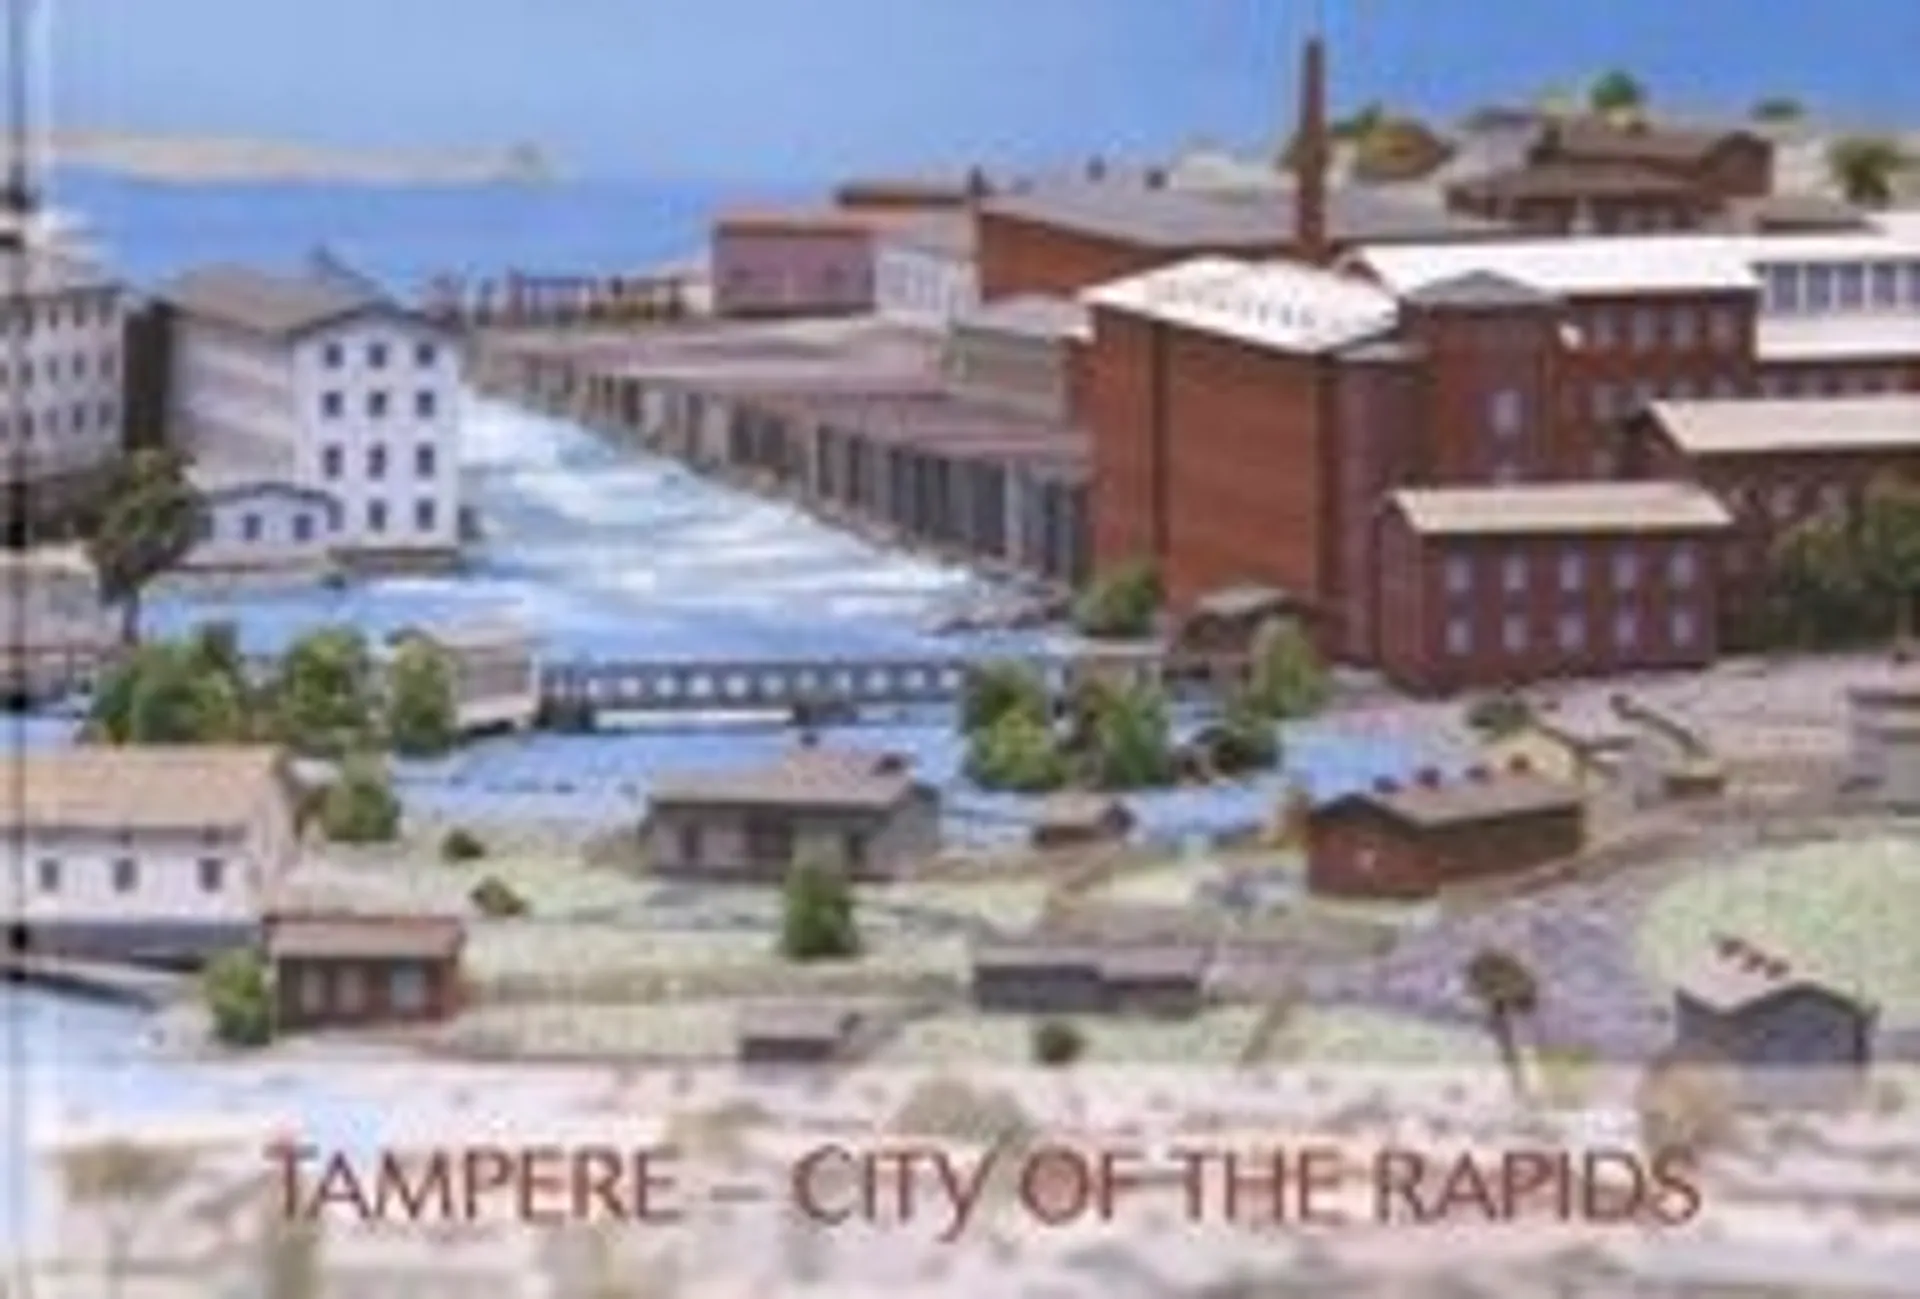 Tampere - City of the Rapids